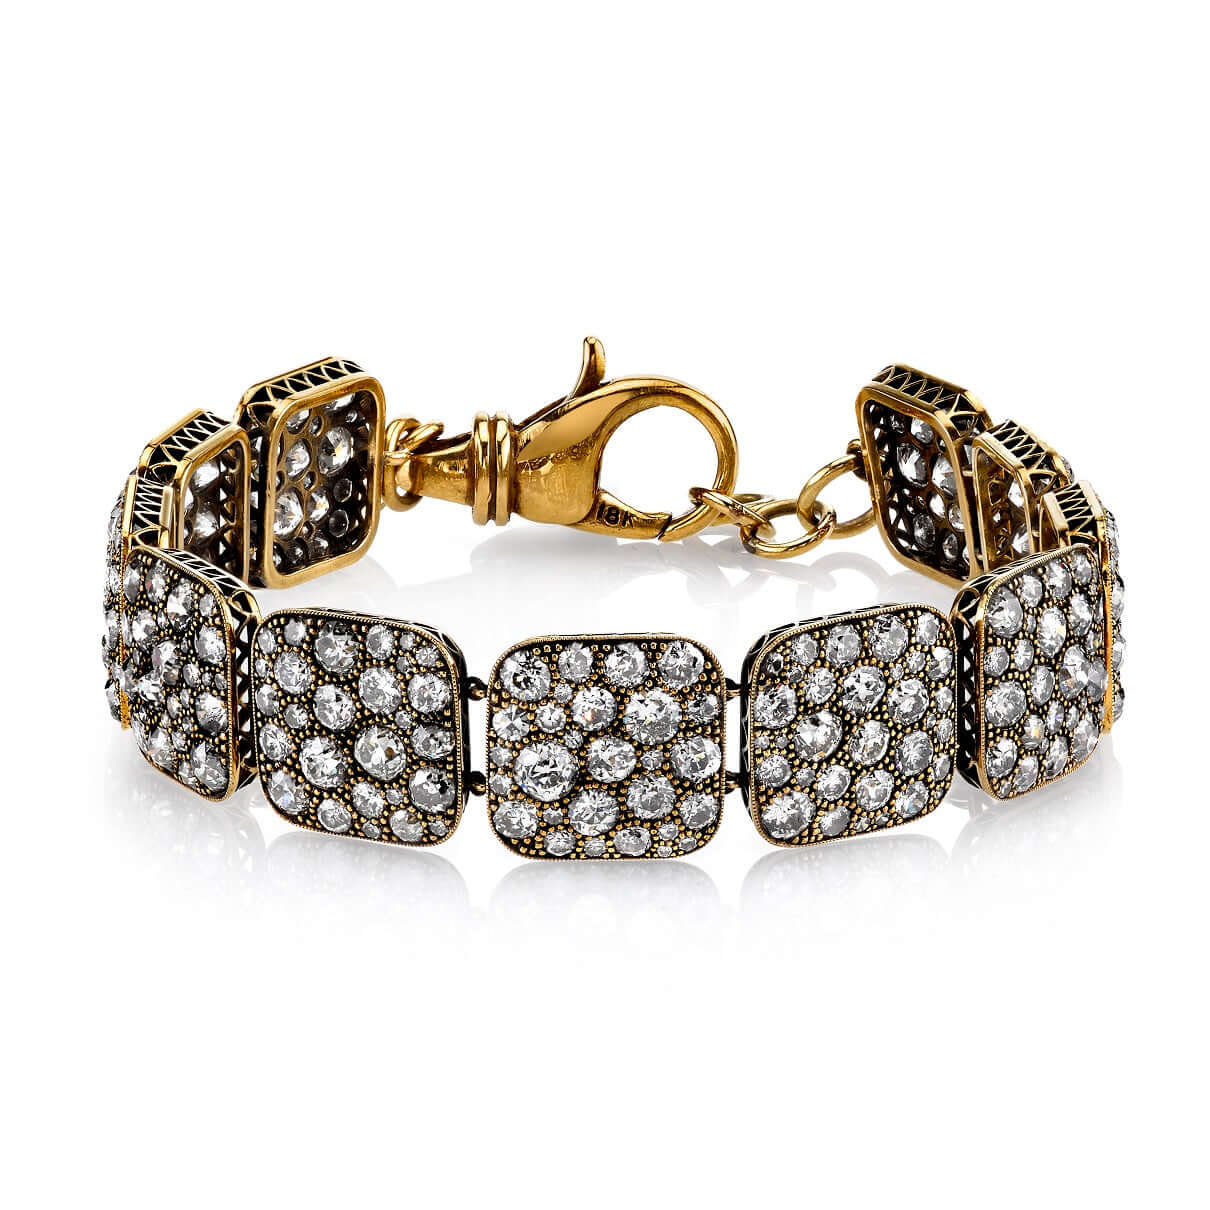 SINGLE STONE COBBLESTONE LINK BRACELET featuring Approximately 21.35ctw varying old cut and round brilliant cut diamonds set in a handcrafted, oxidized 18K yellow gold cobblestone link bracelet.